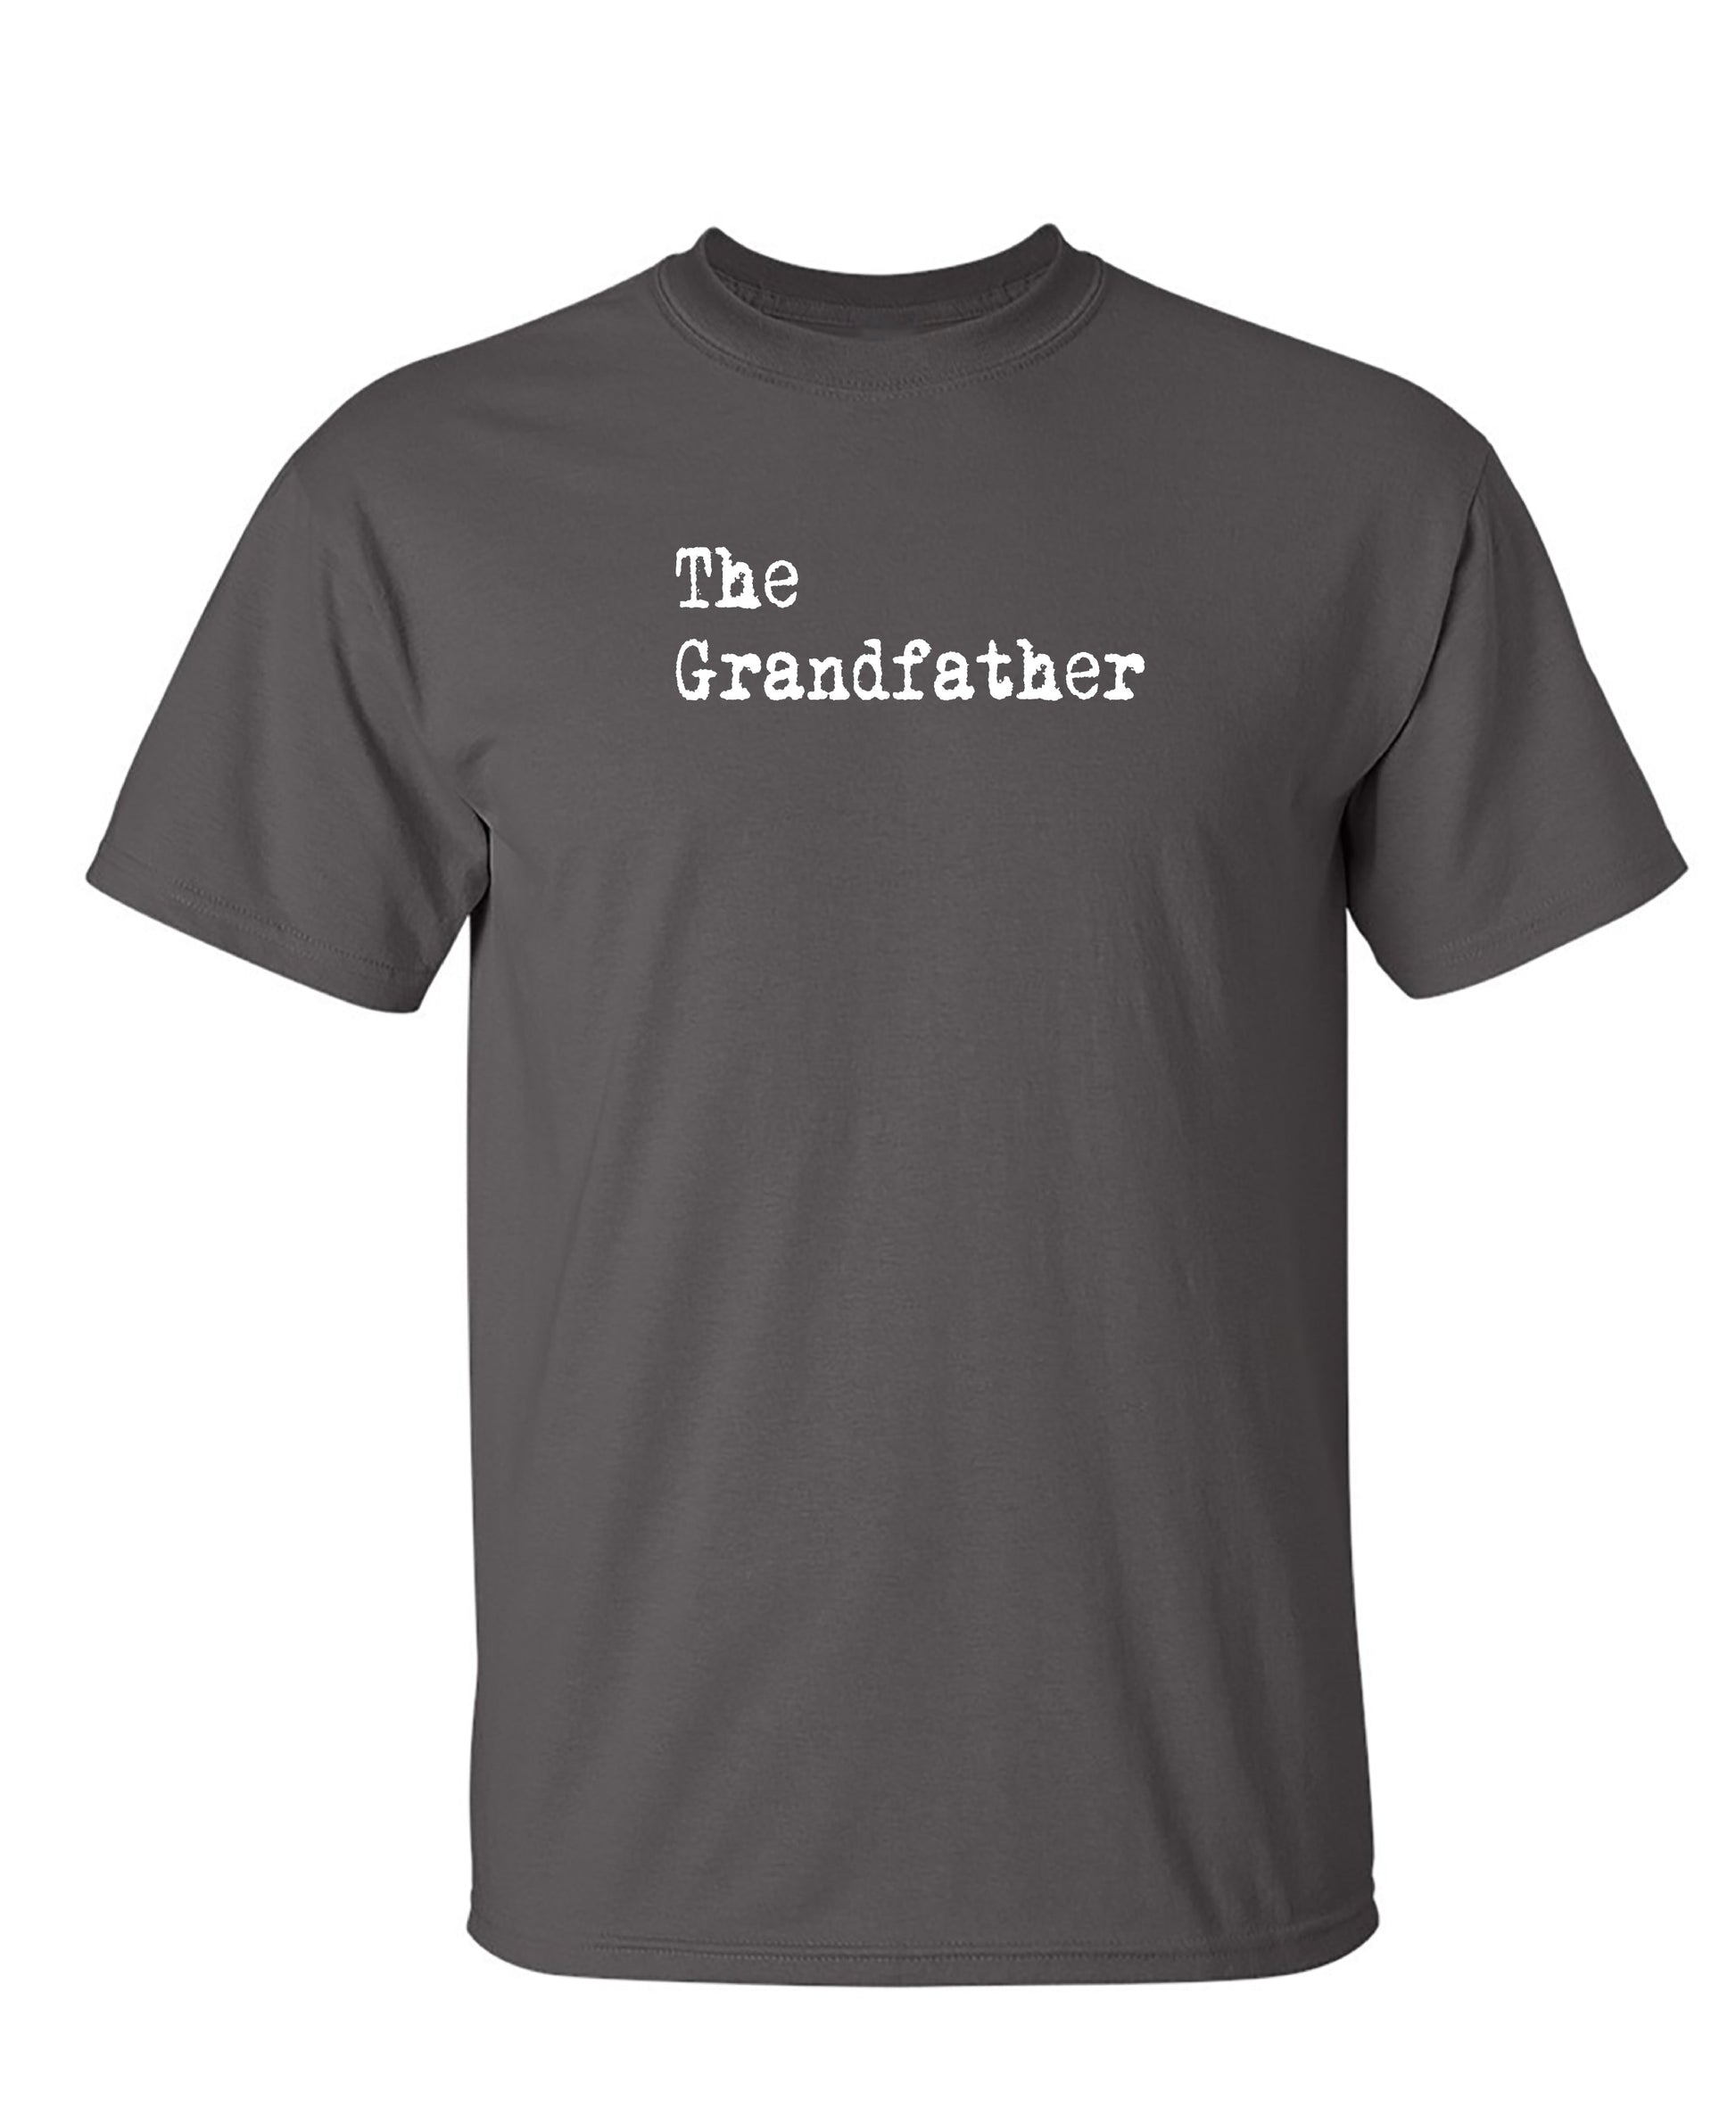 The Grandfather - Funny T Shirts & Graphic Tees